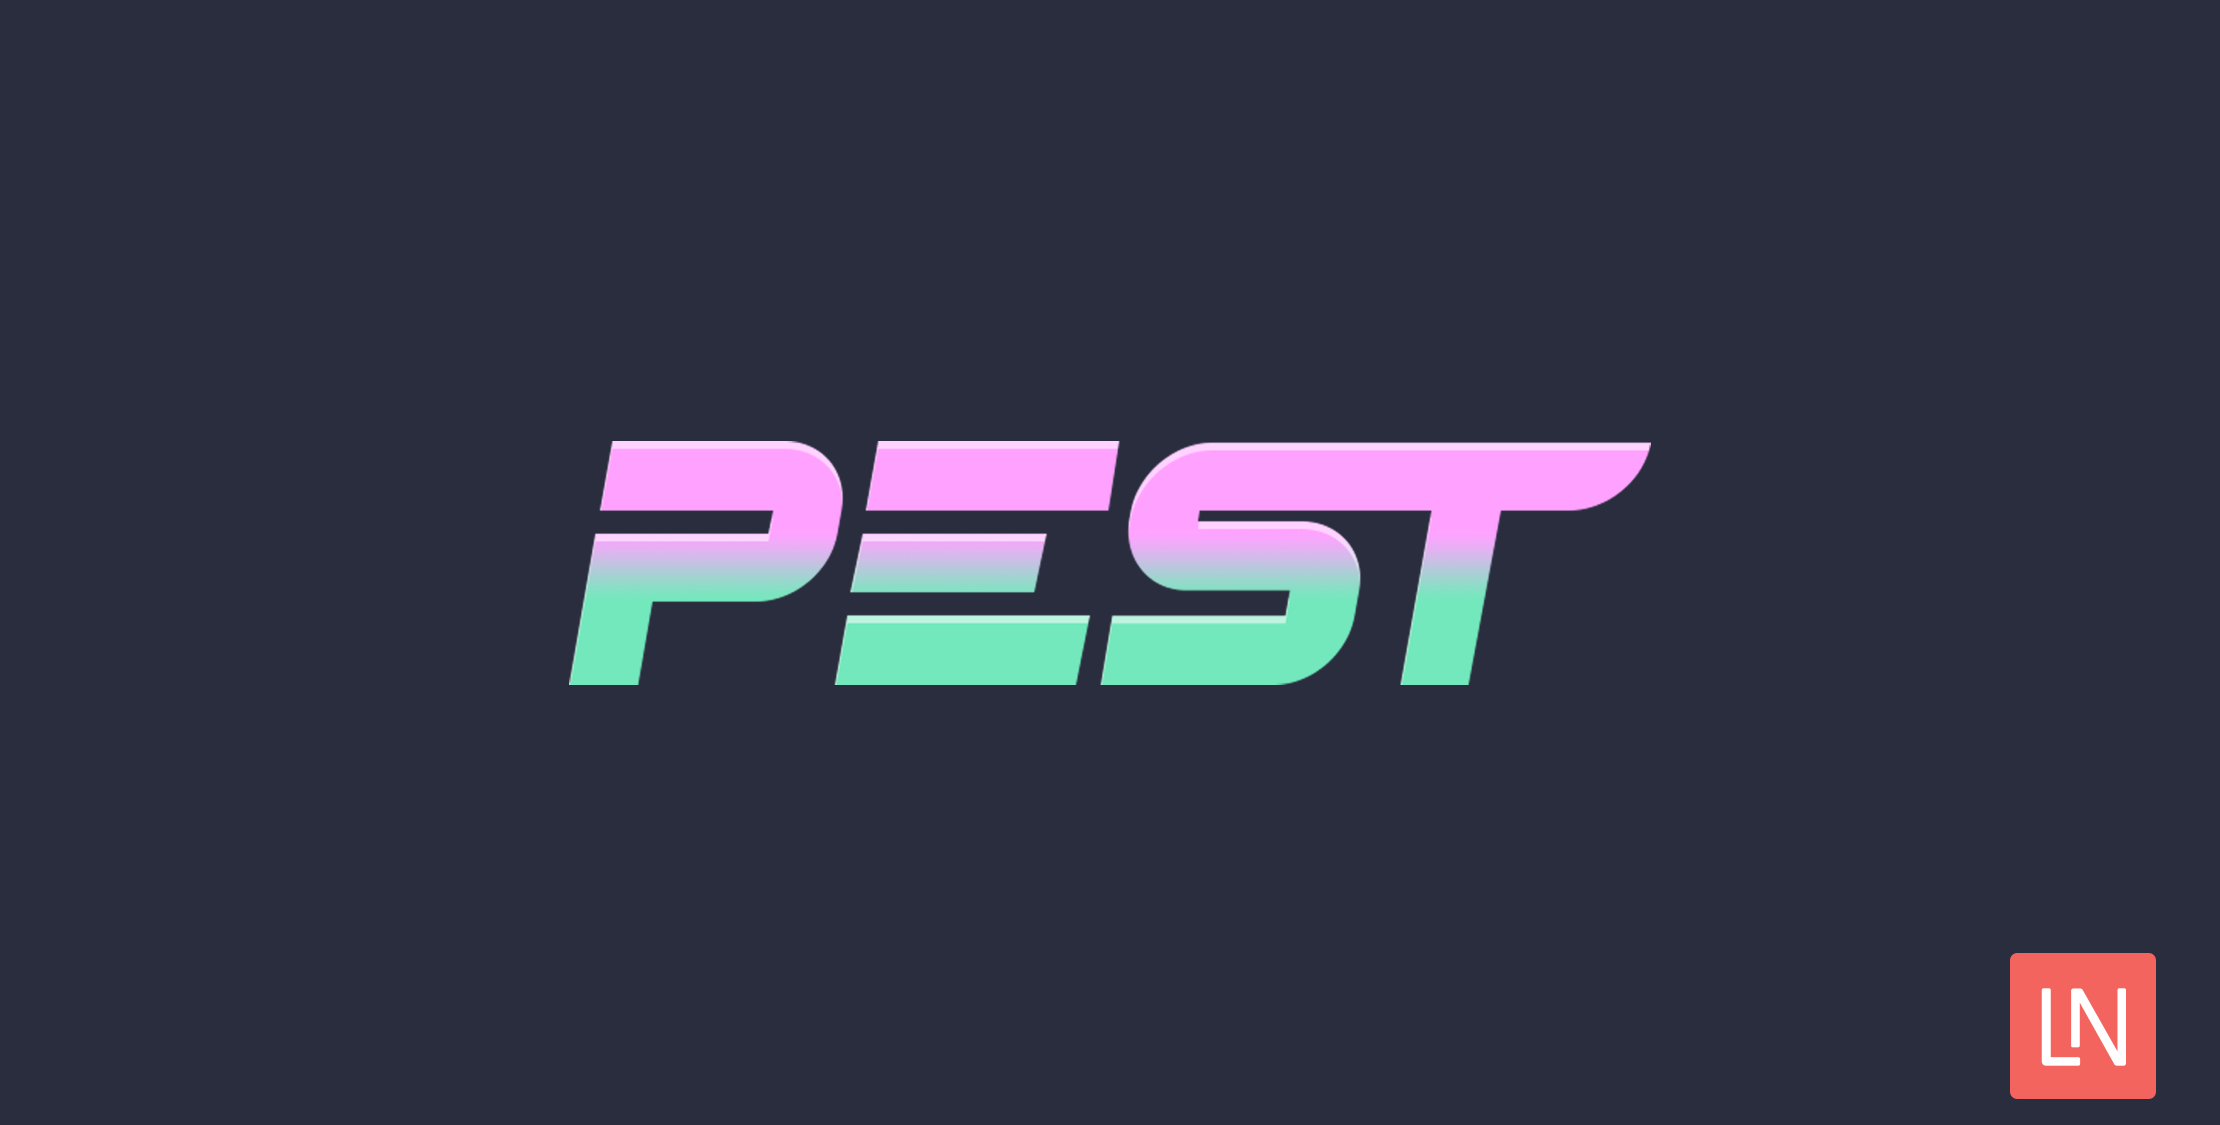 Learn how to start Testing in Laravel with Simple Examples using PHPUnit and PEST image